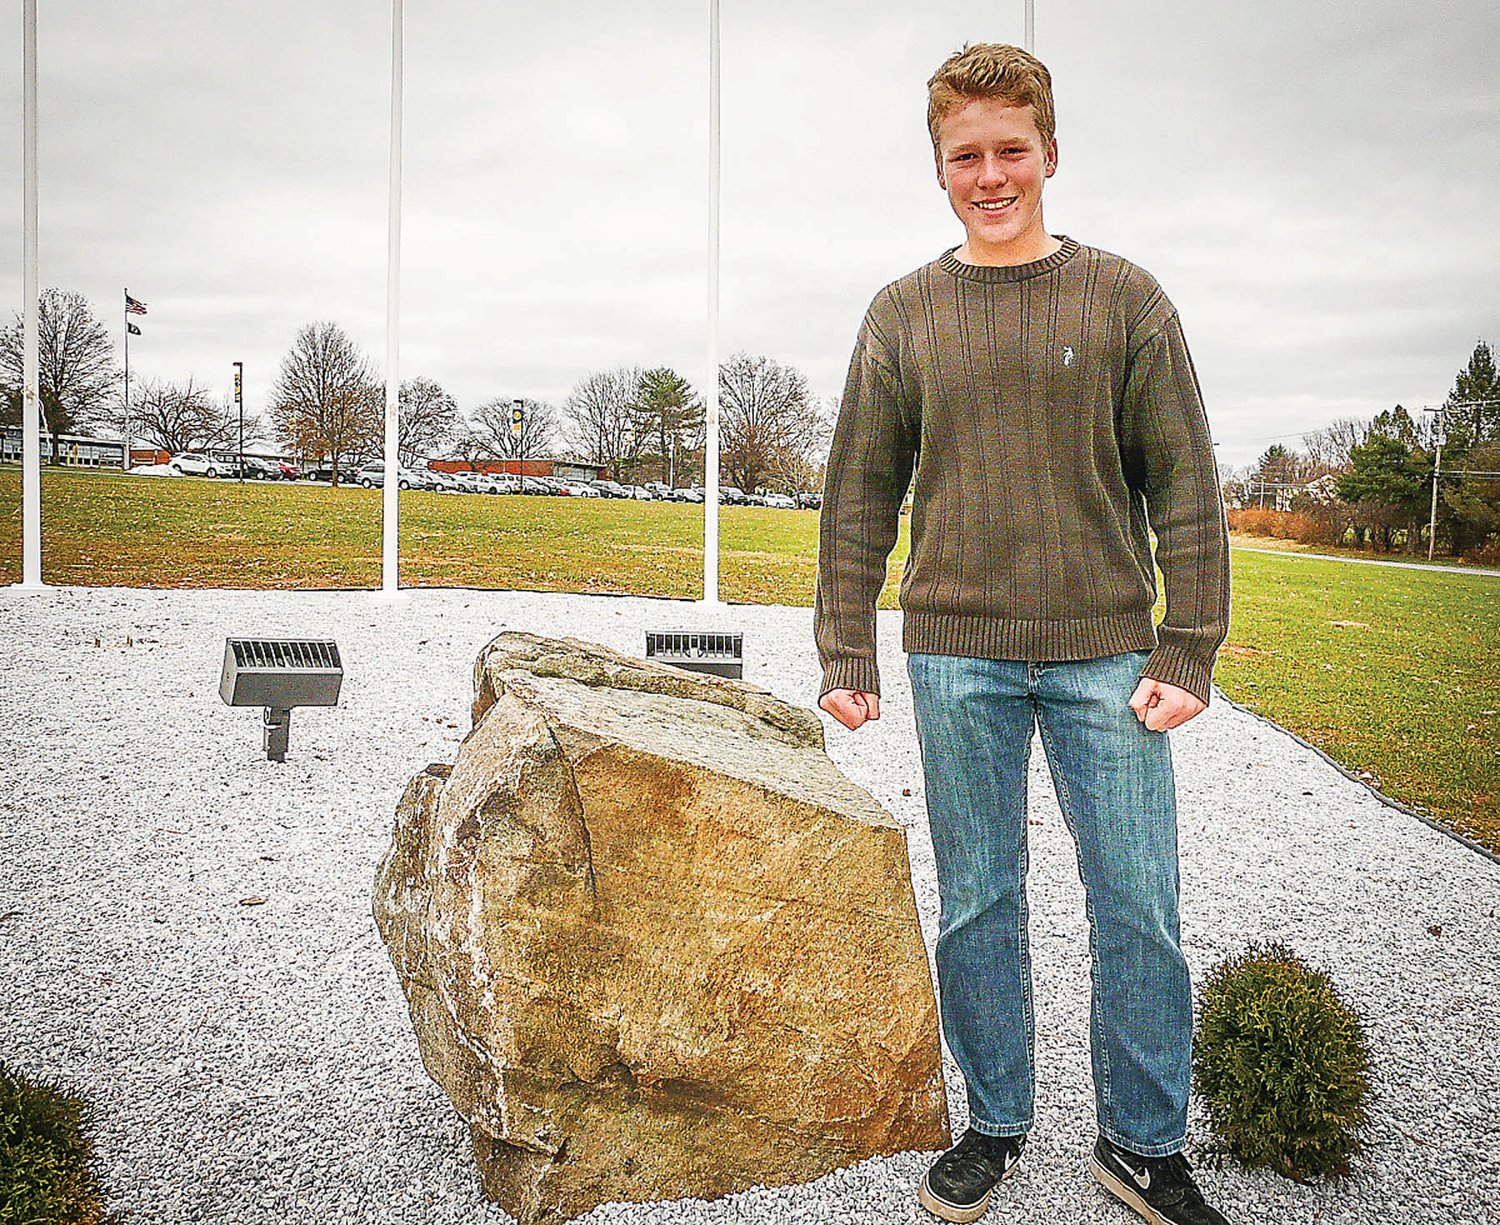 Eagle Scout candidate Liam Kephart is making good progress on his monument to Delaware Valley High School alumni who have served in the armed forces.